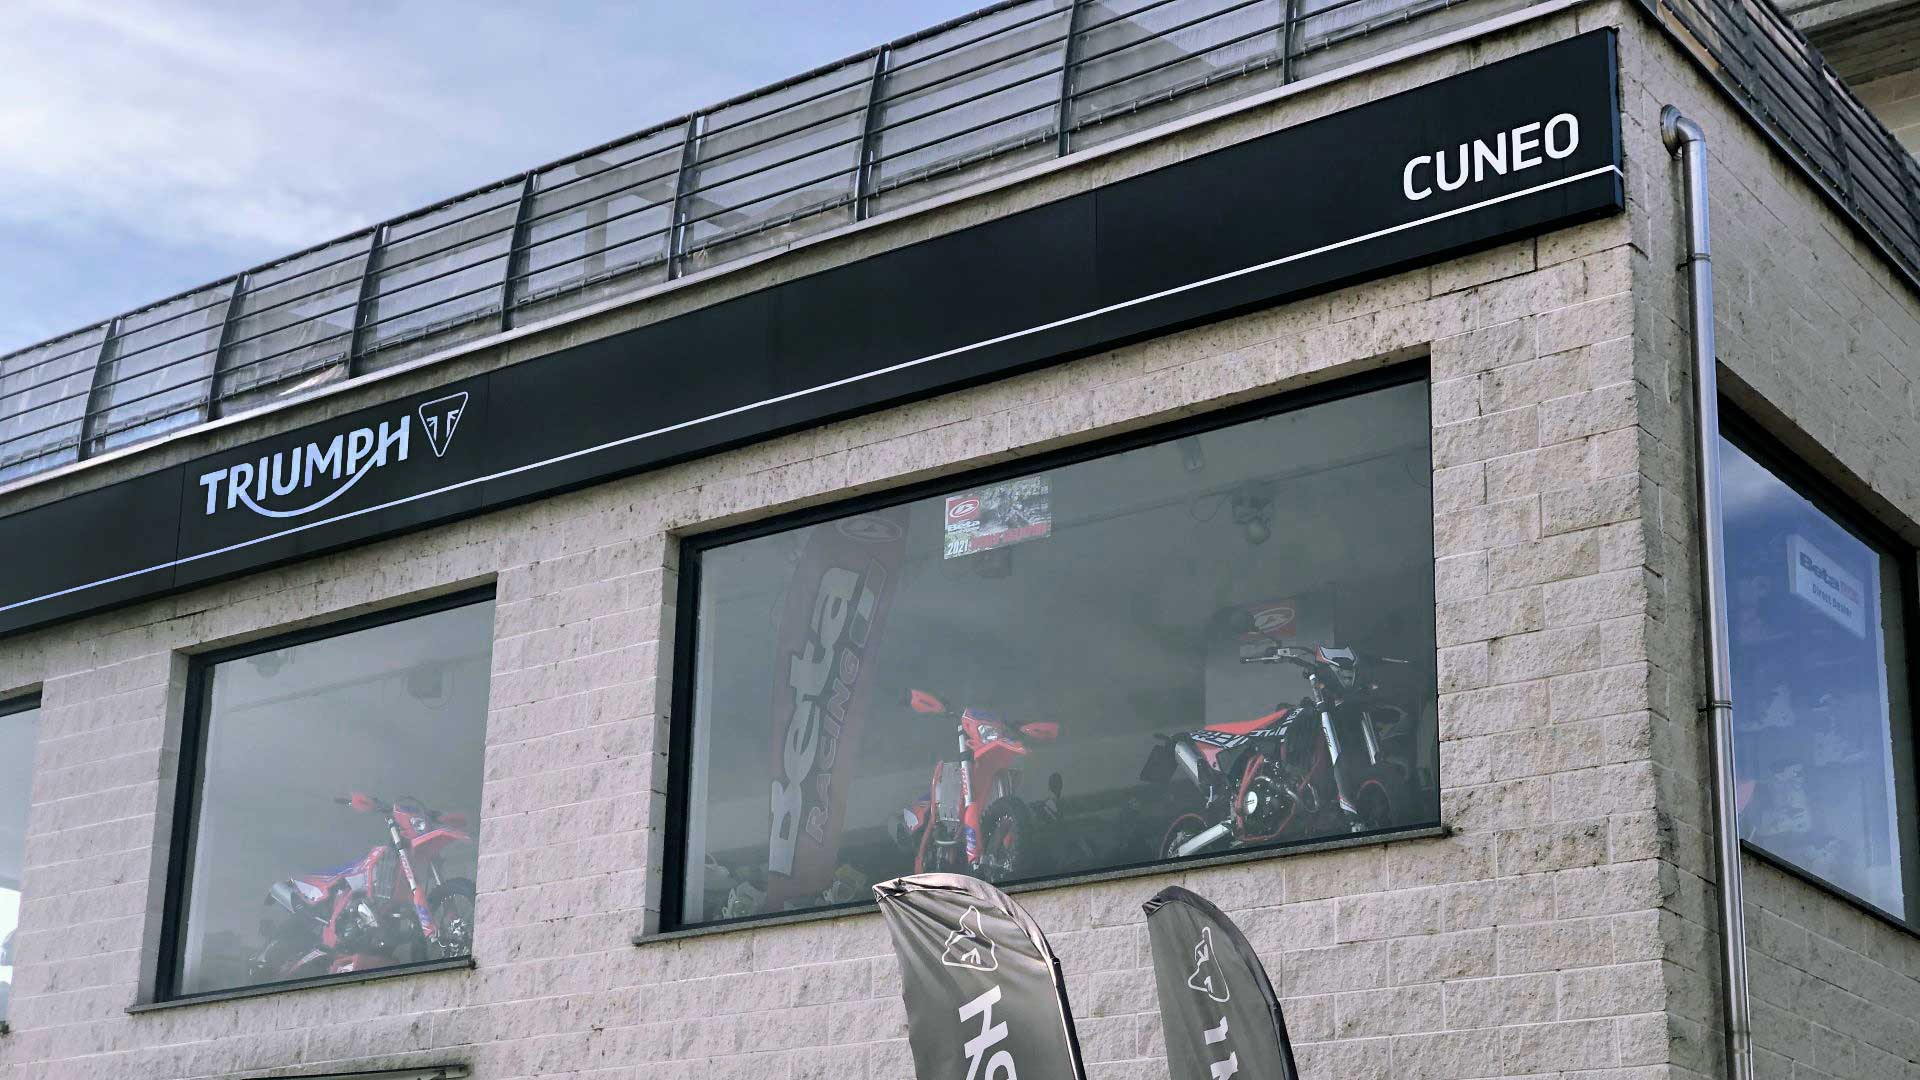 Triumph motorcycles dealership in Cuneo